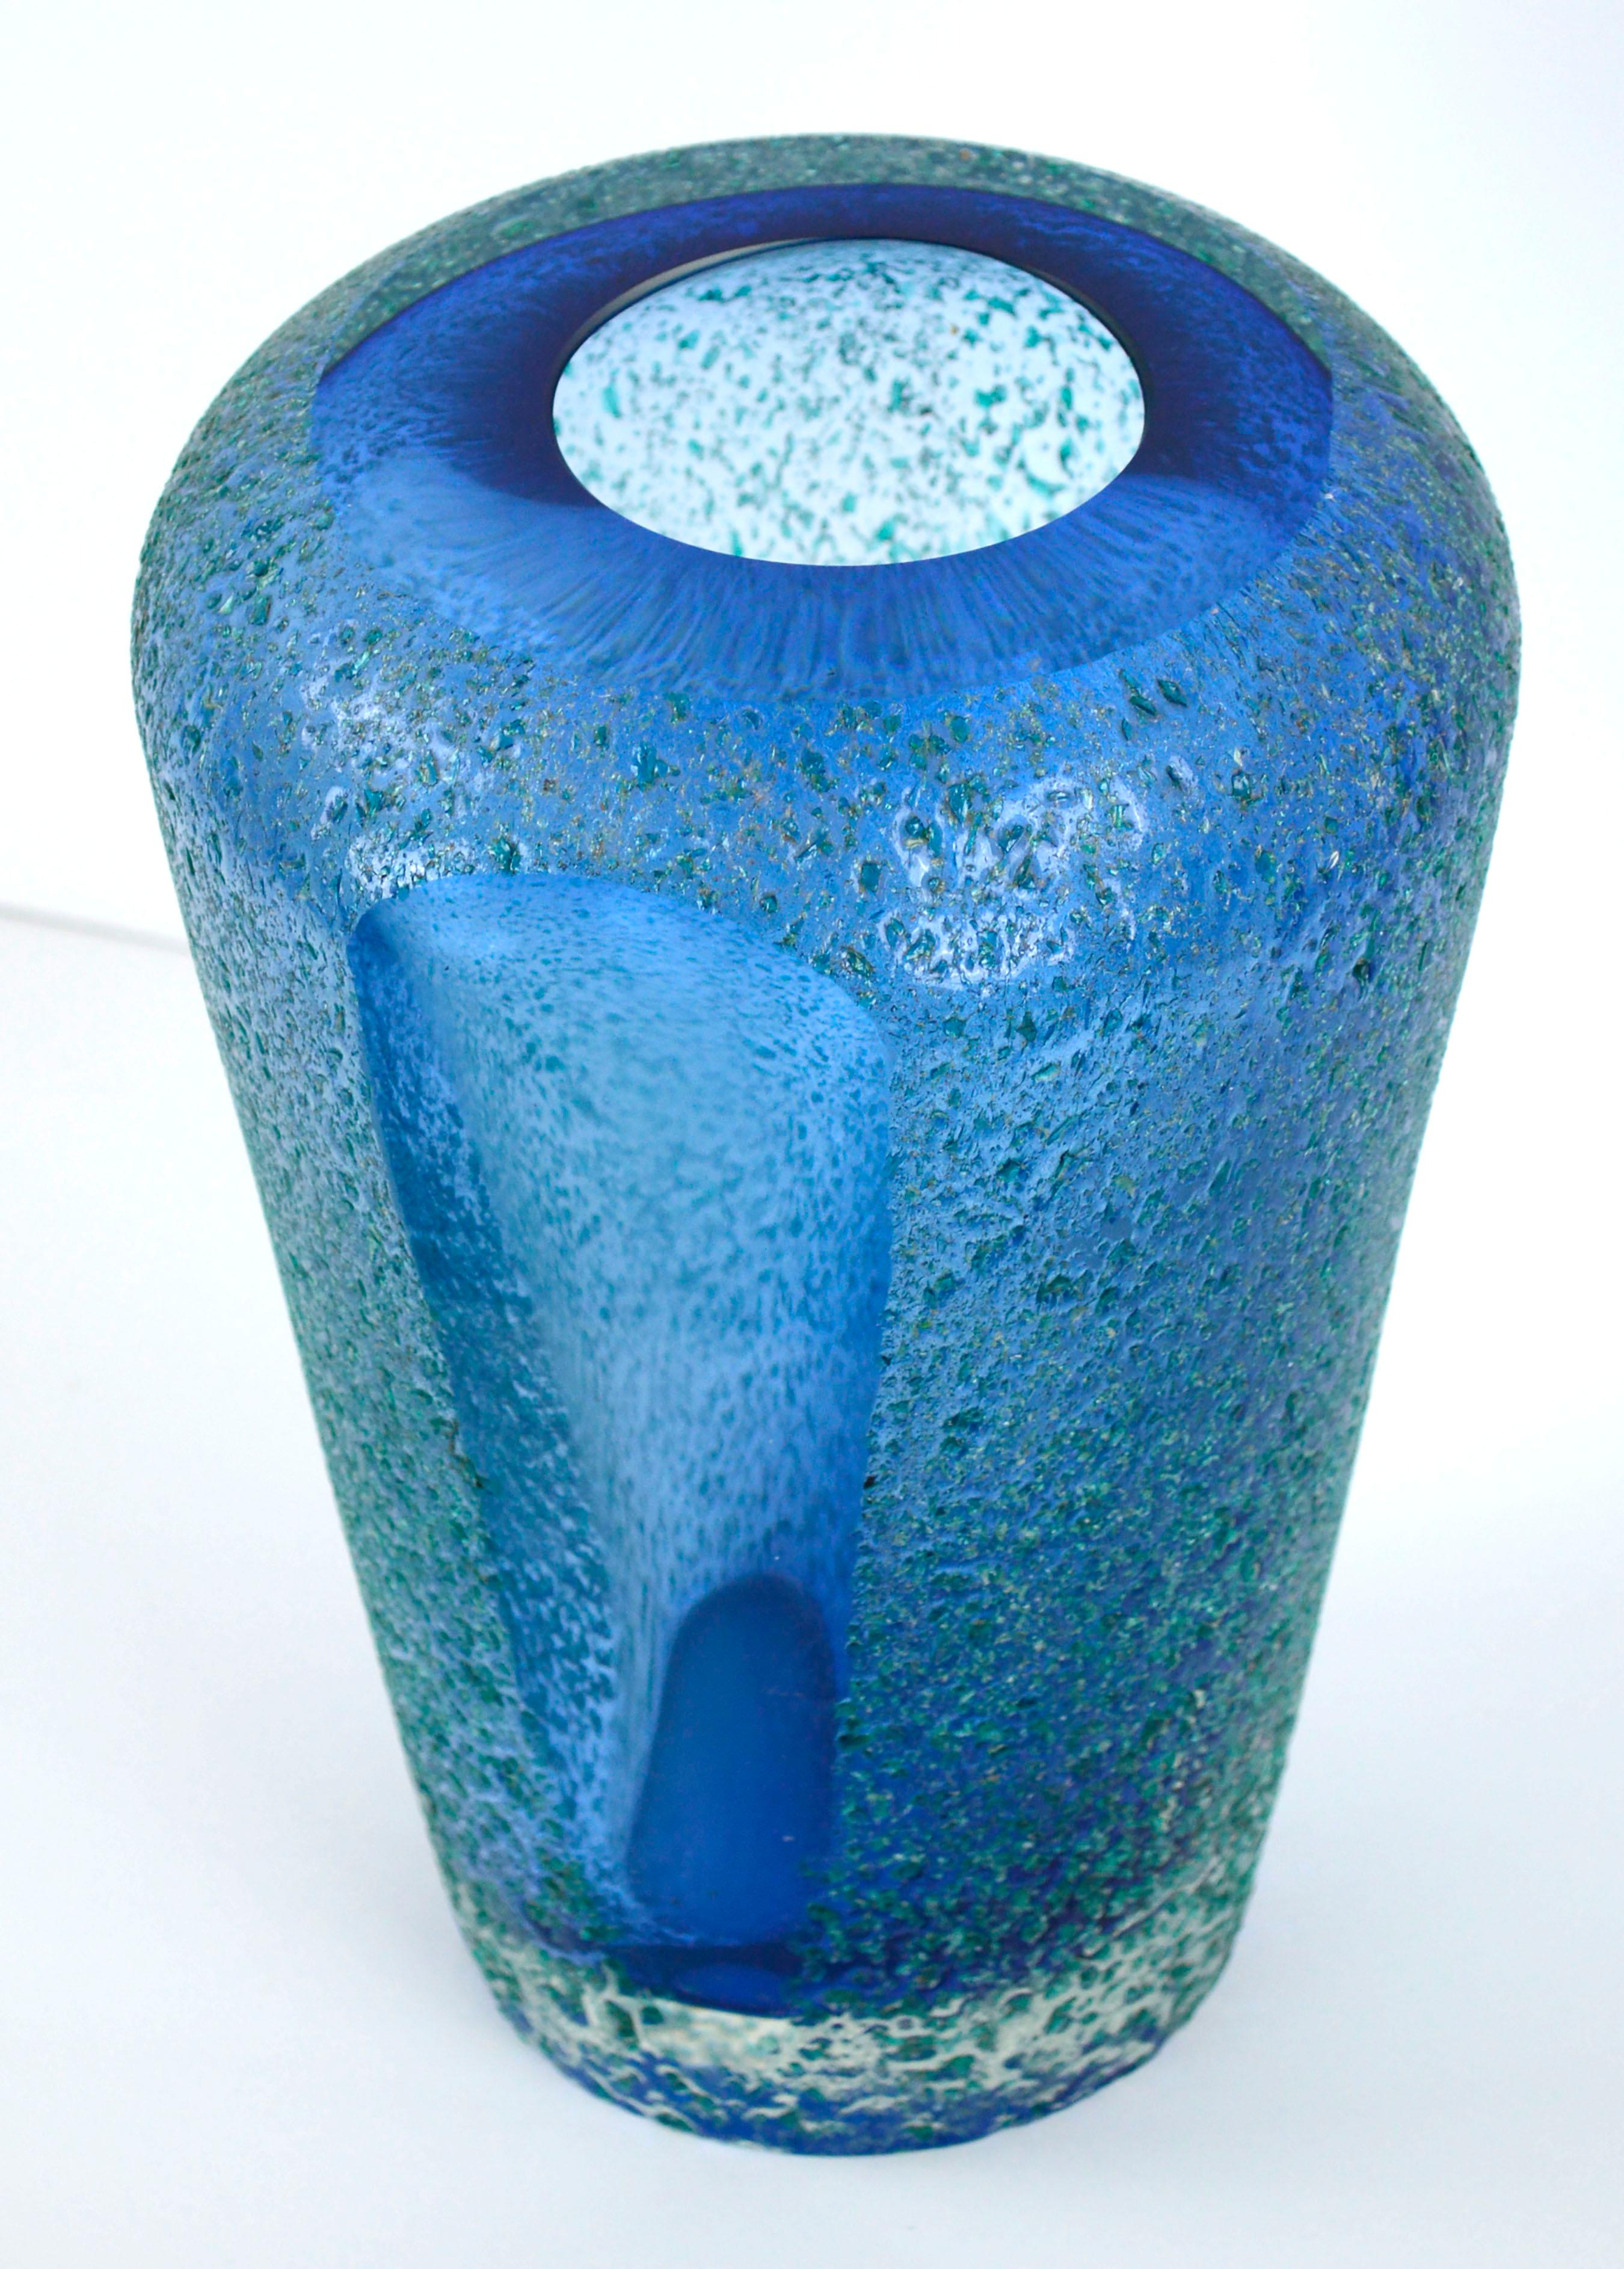 Mid-Century Modern Cobalt & Azure Blue Murano Sommerso Textured Glass Vase 

Striking and substantial mid-Century modern Murano Sommerso glass vase, in brilliant cobalt and azure blue, with a textured surface contrasting from a smooth polished front